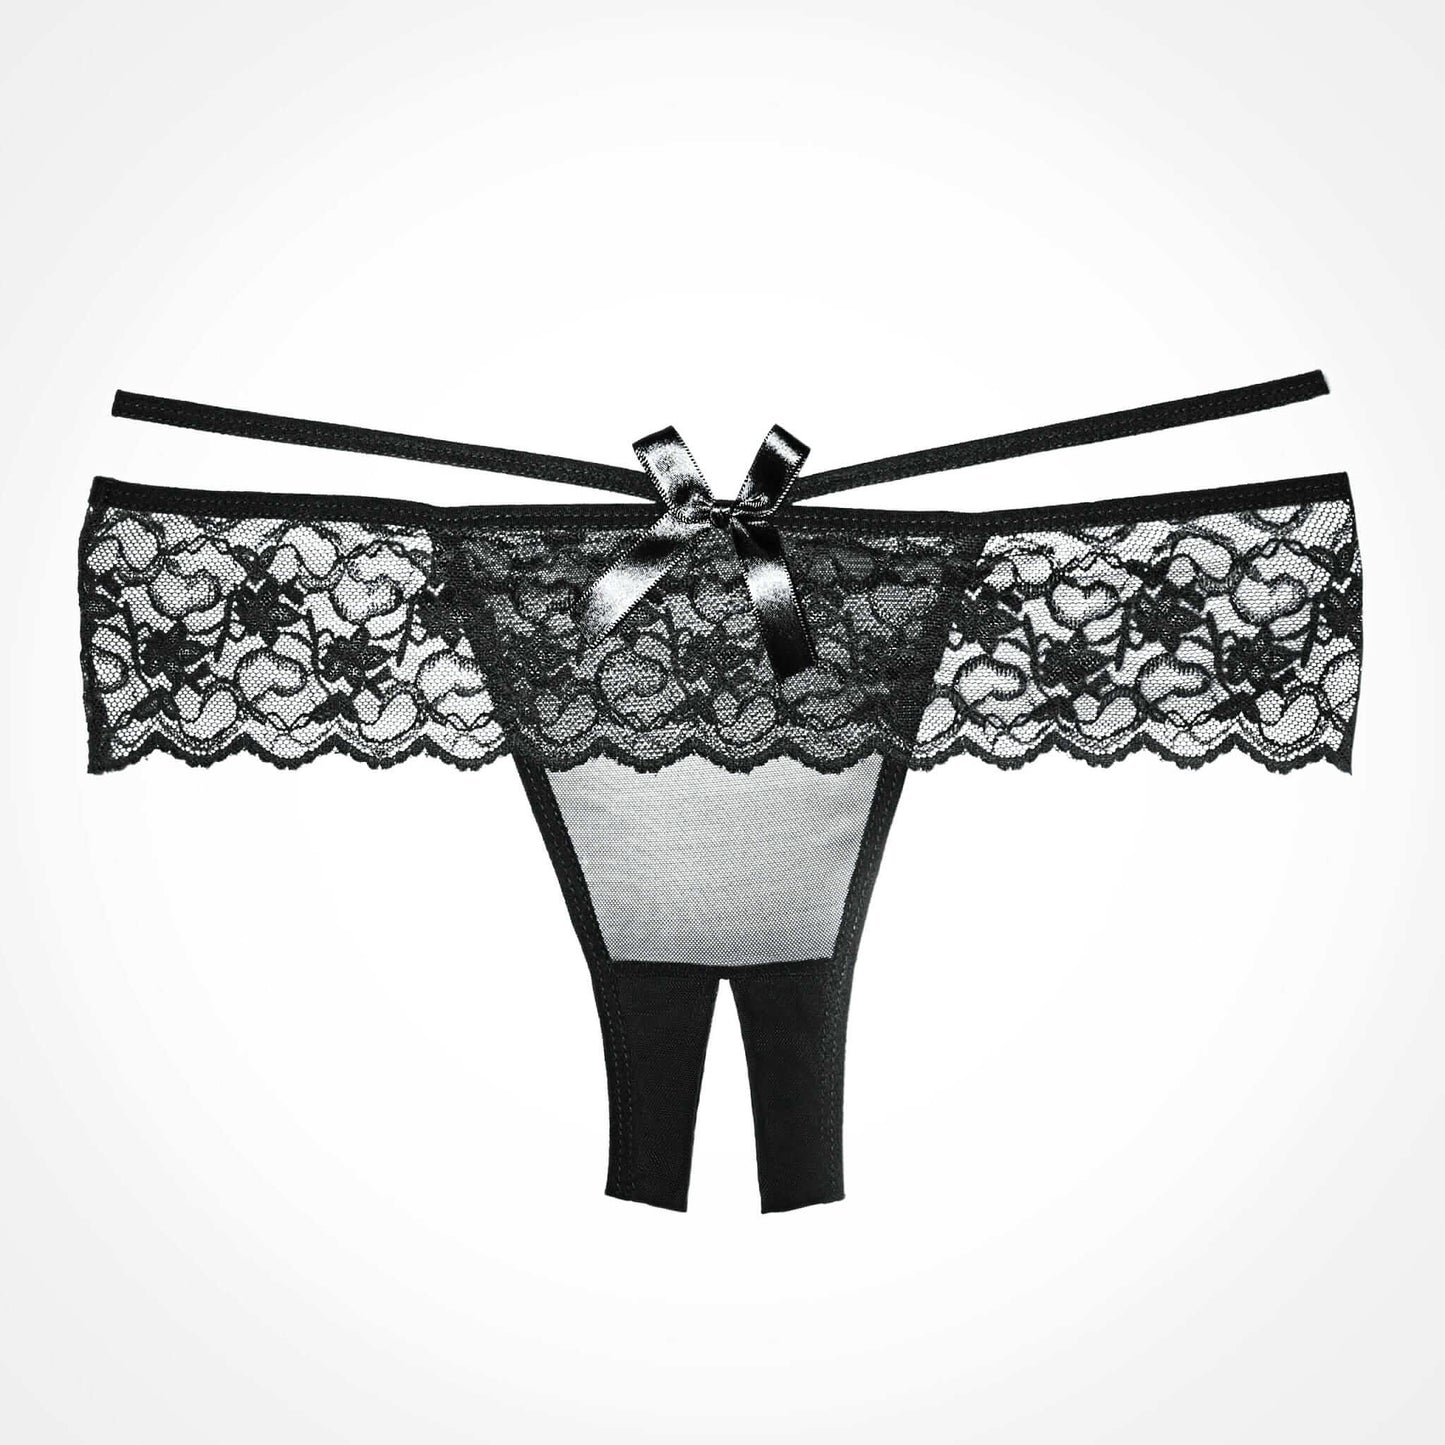 Allure Adore Angel Panty - Black, One Size - Thorn & Feather